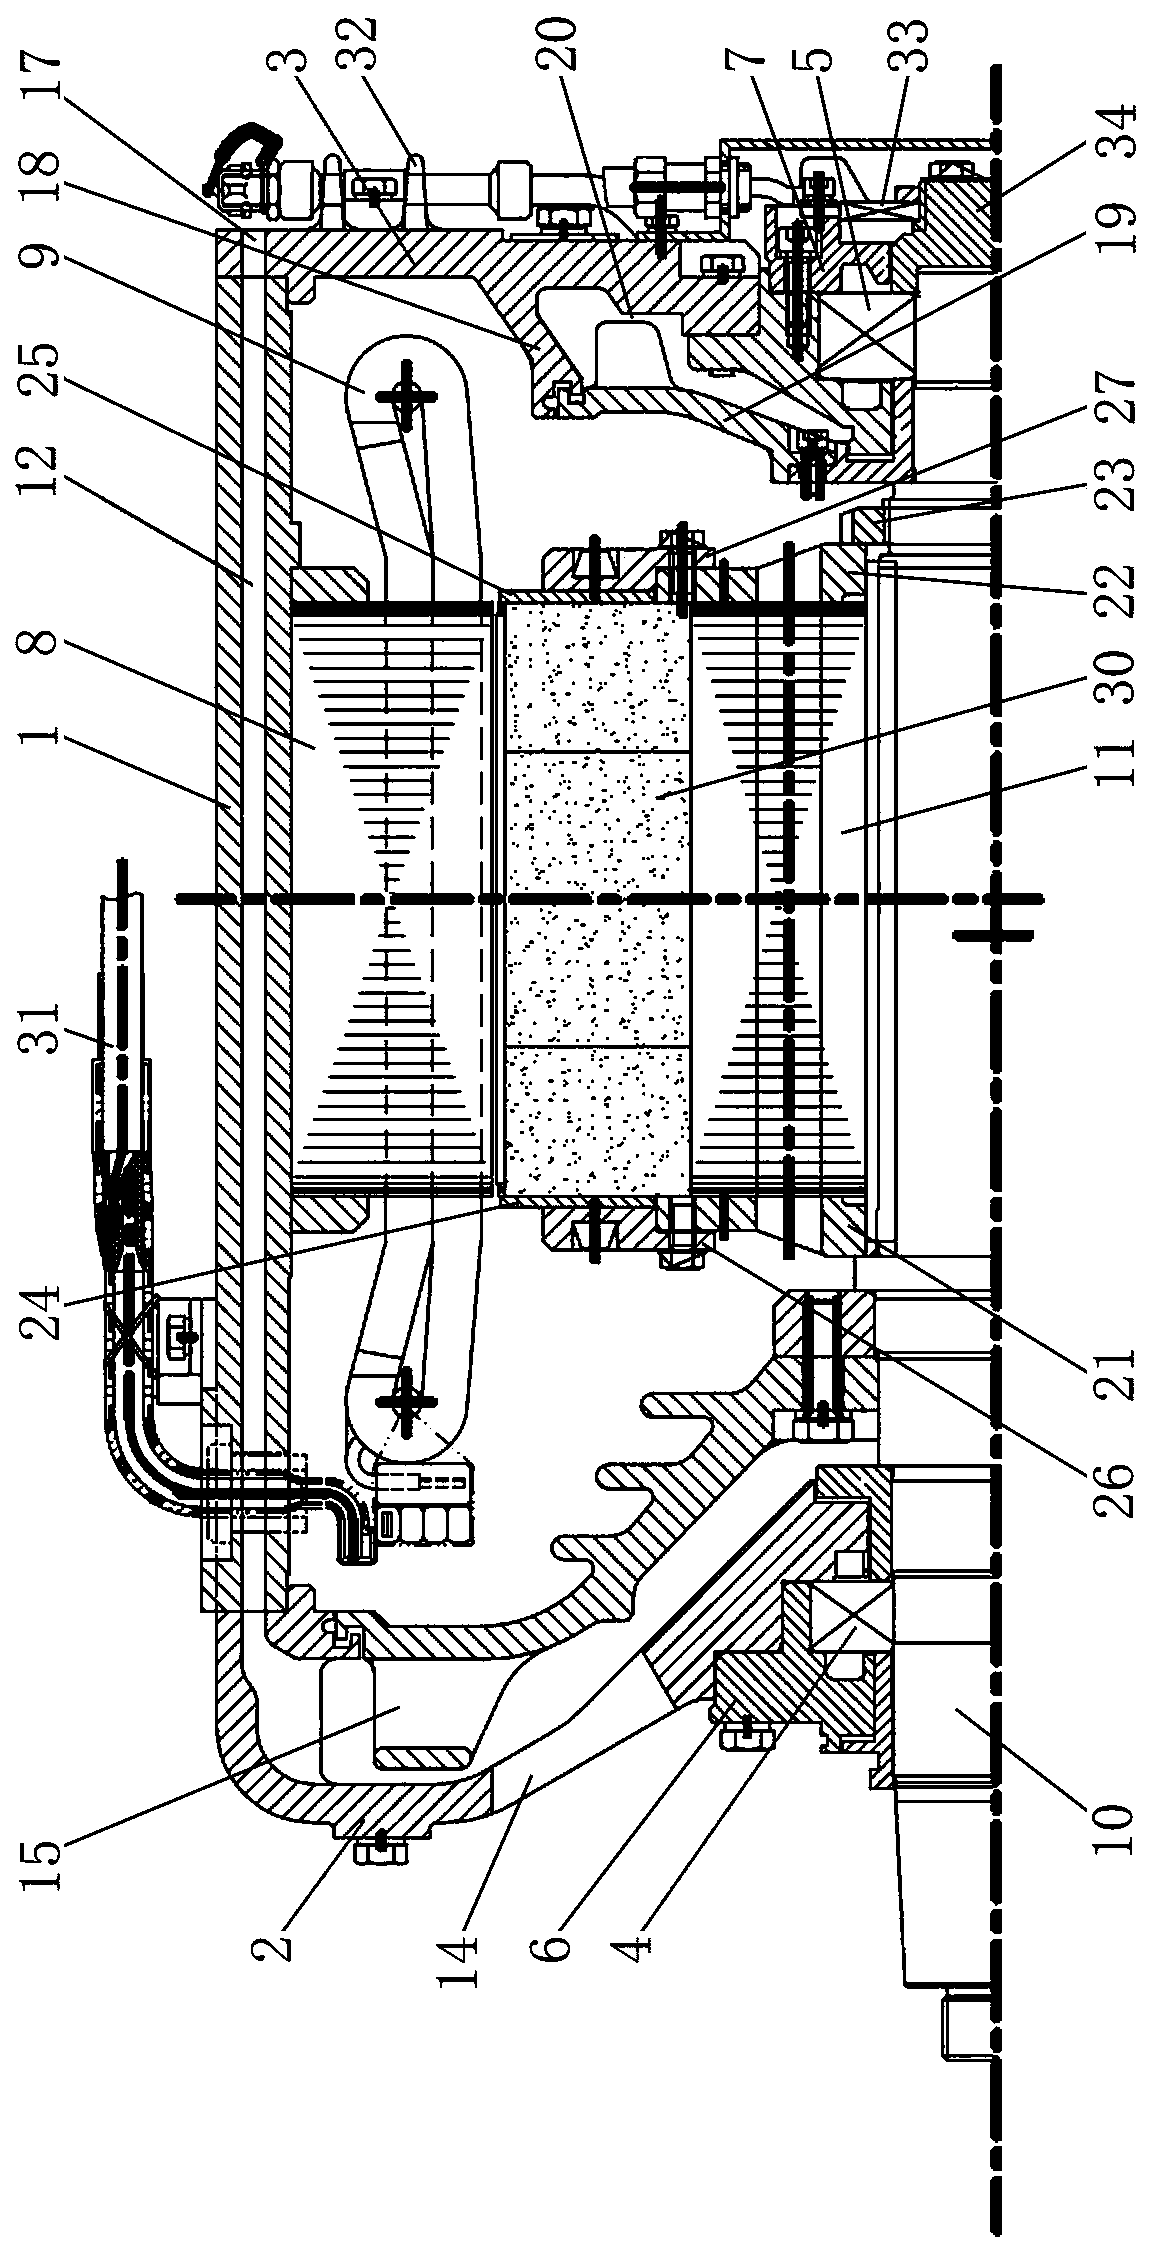 A permanent magnet traction motor for subway